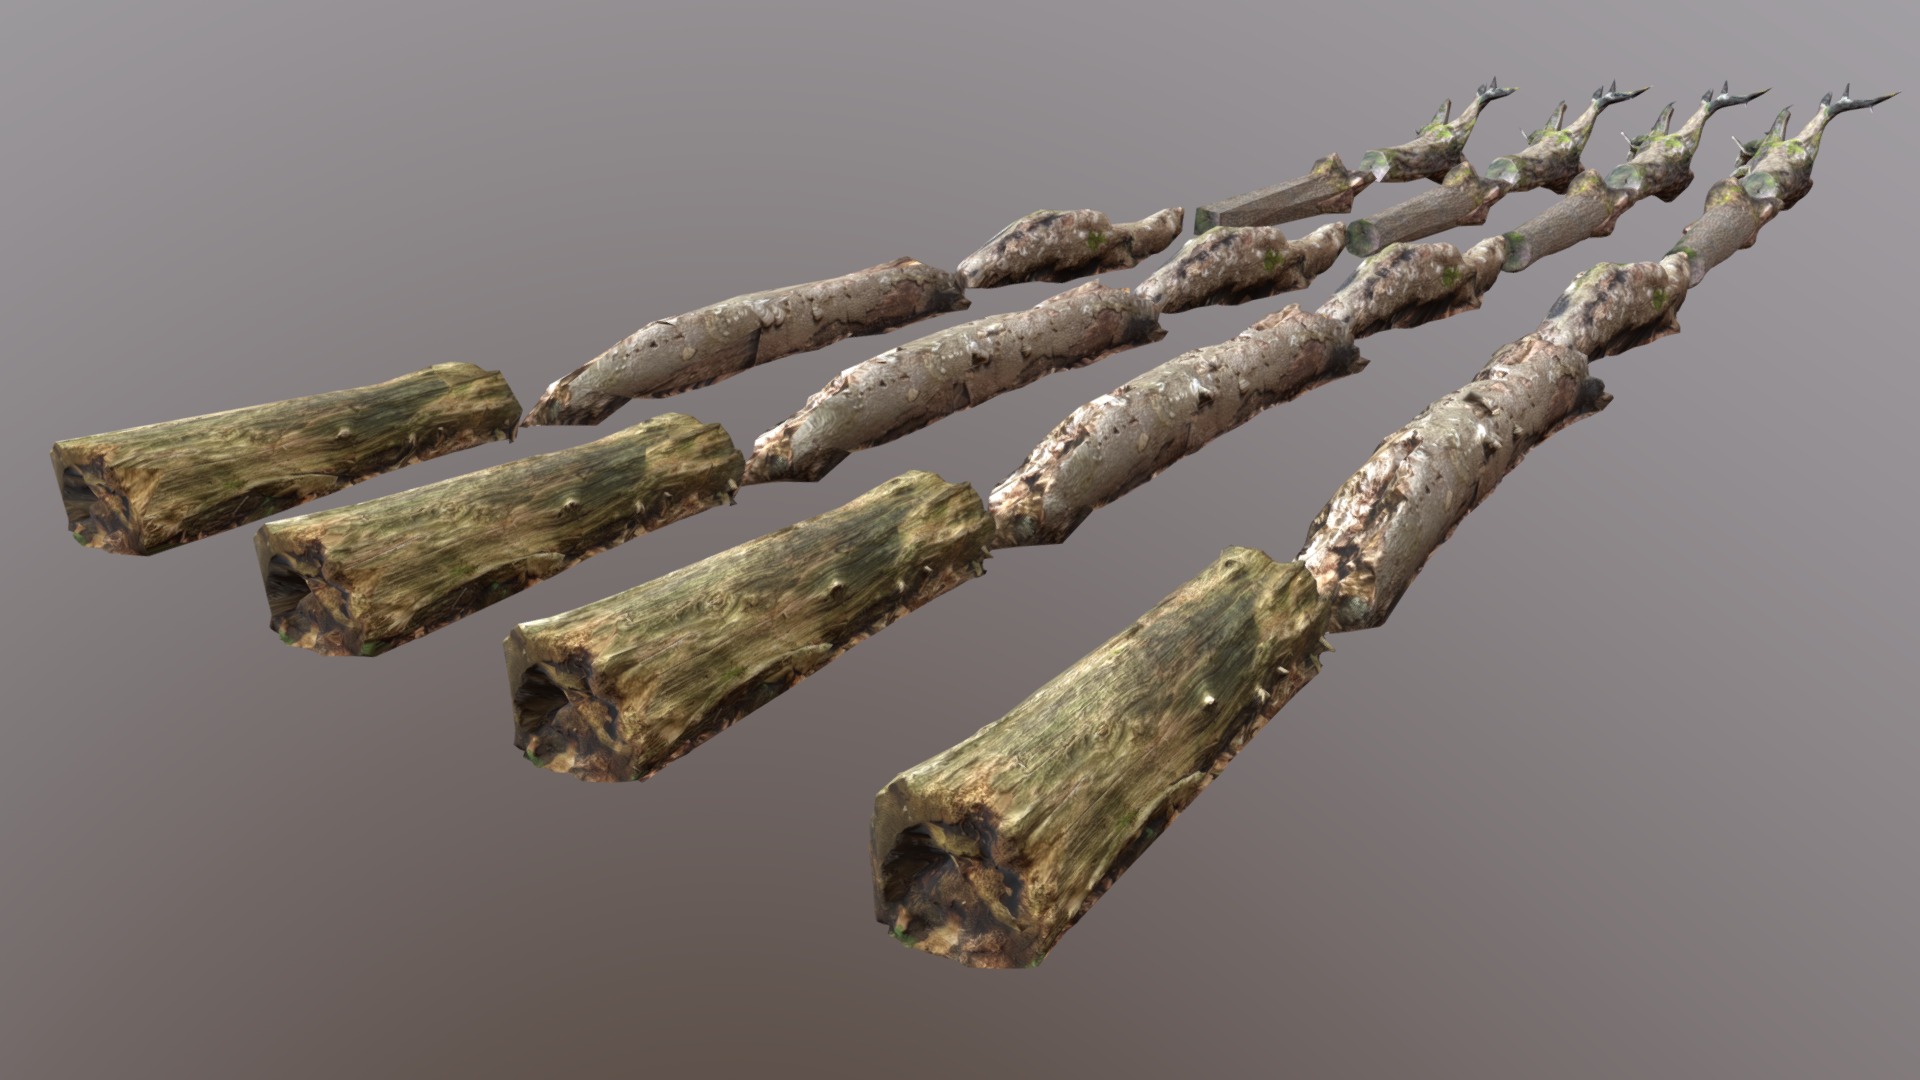 3D model Trunks & Logs Pack - This is a 3D model of the Trunks & Logs Pack. The 3D model is about a close-up of some branches.